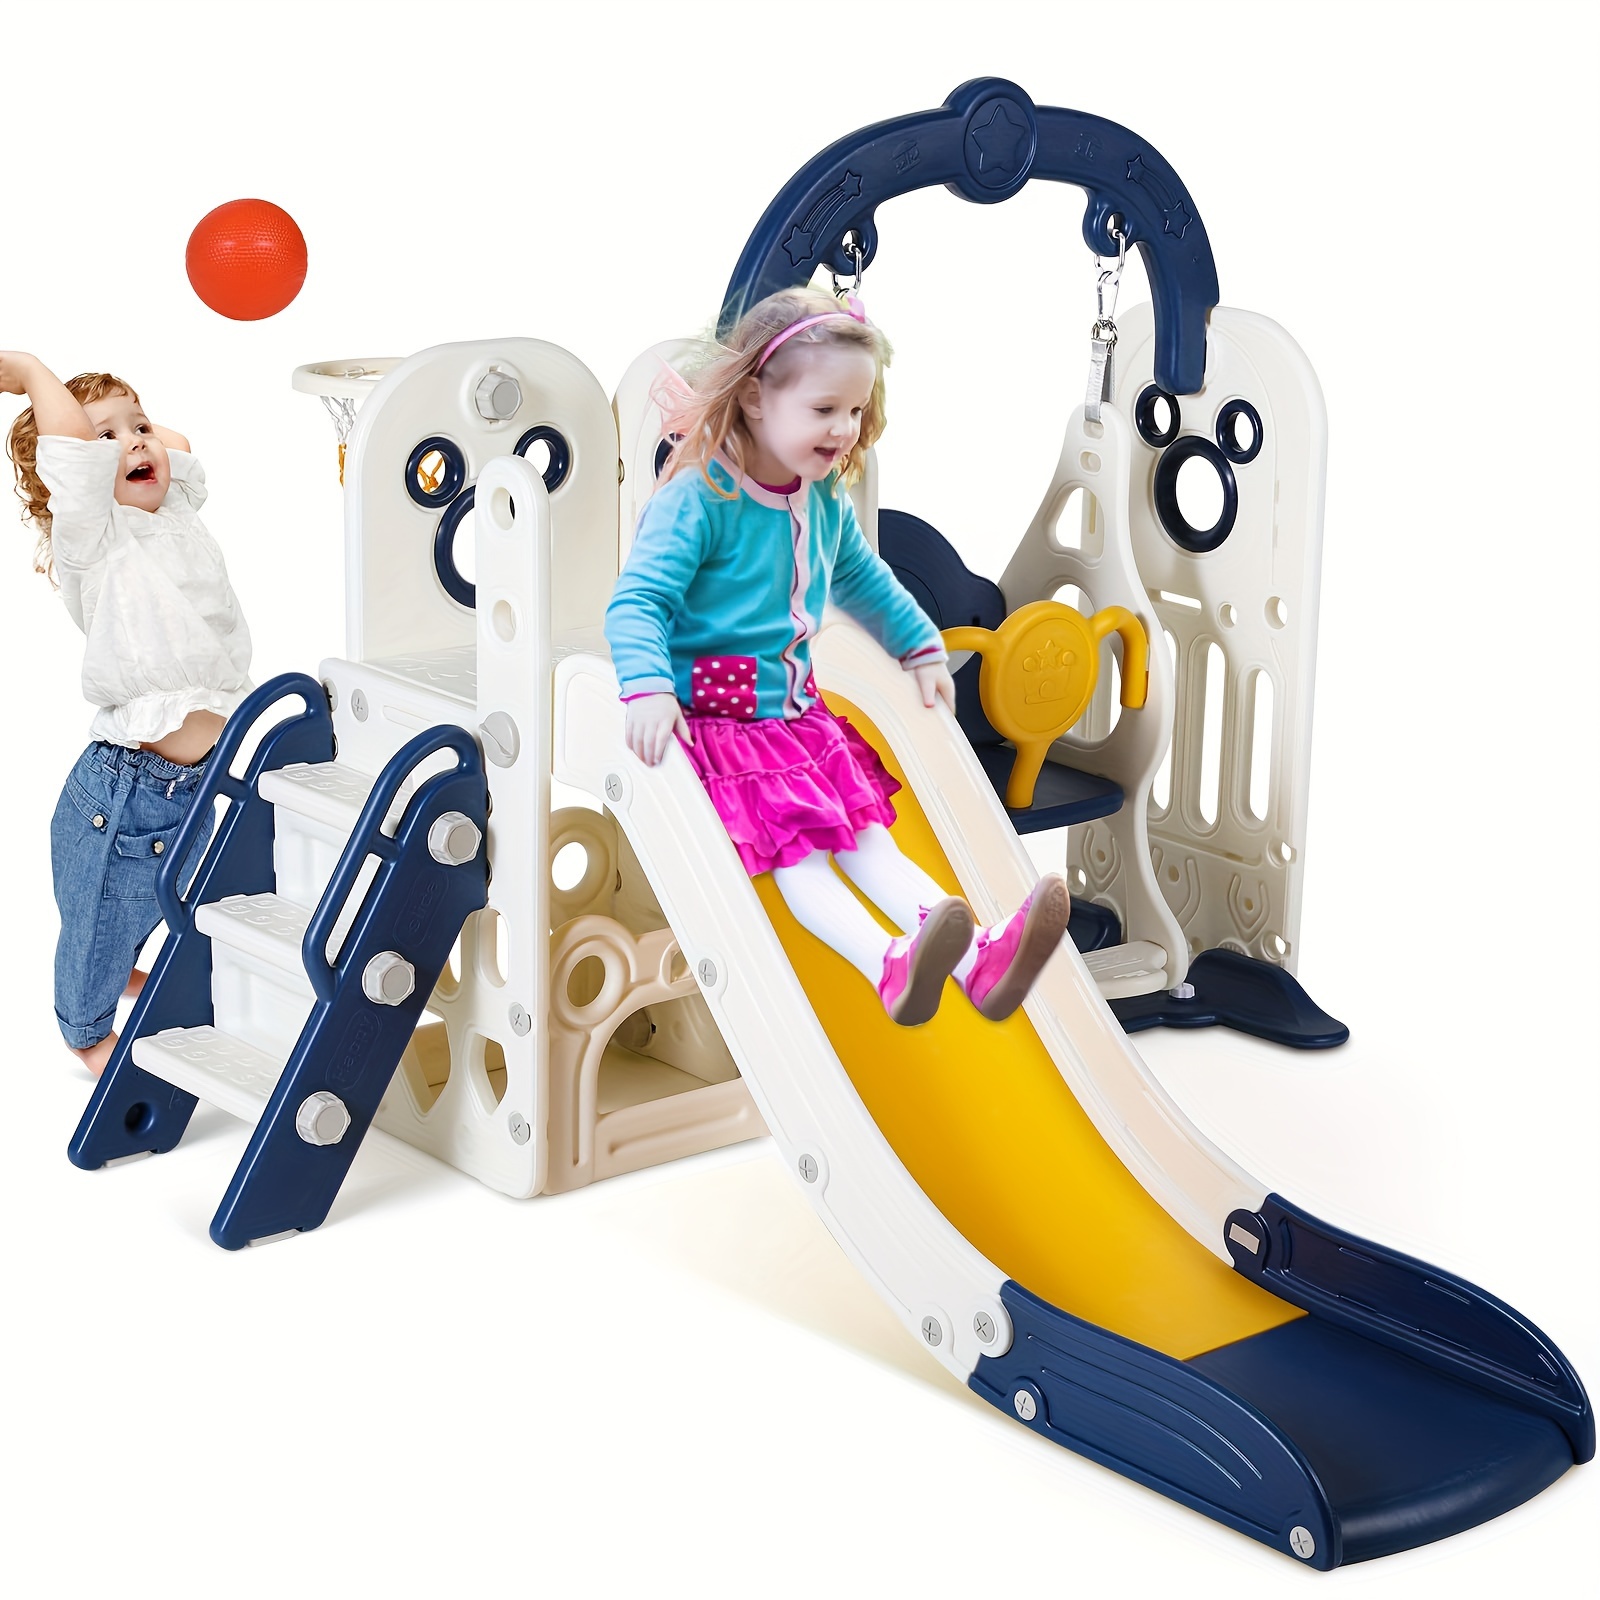 

Swing Slide For Kids, 5 In 1 Slide Climber For Toddler, With Ball & Hoop, Storage Space, Suction Cup Reinforced Base, Indoor Outdoor Playground, Gift For Boys And Girls